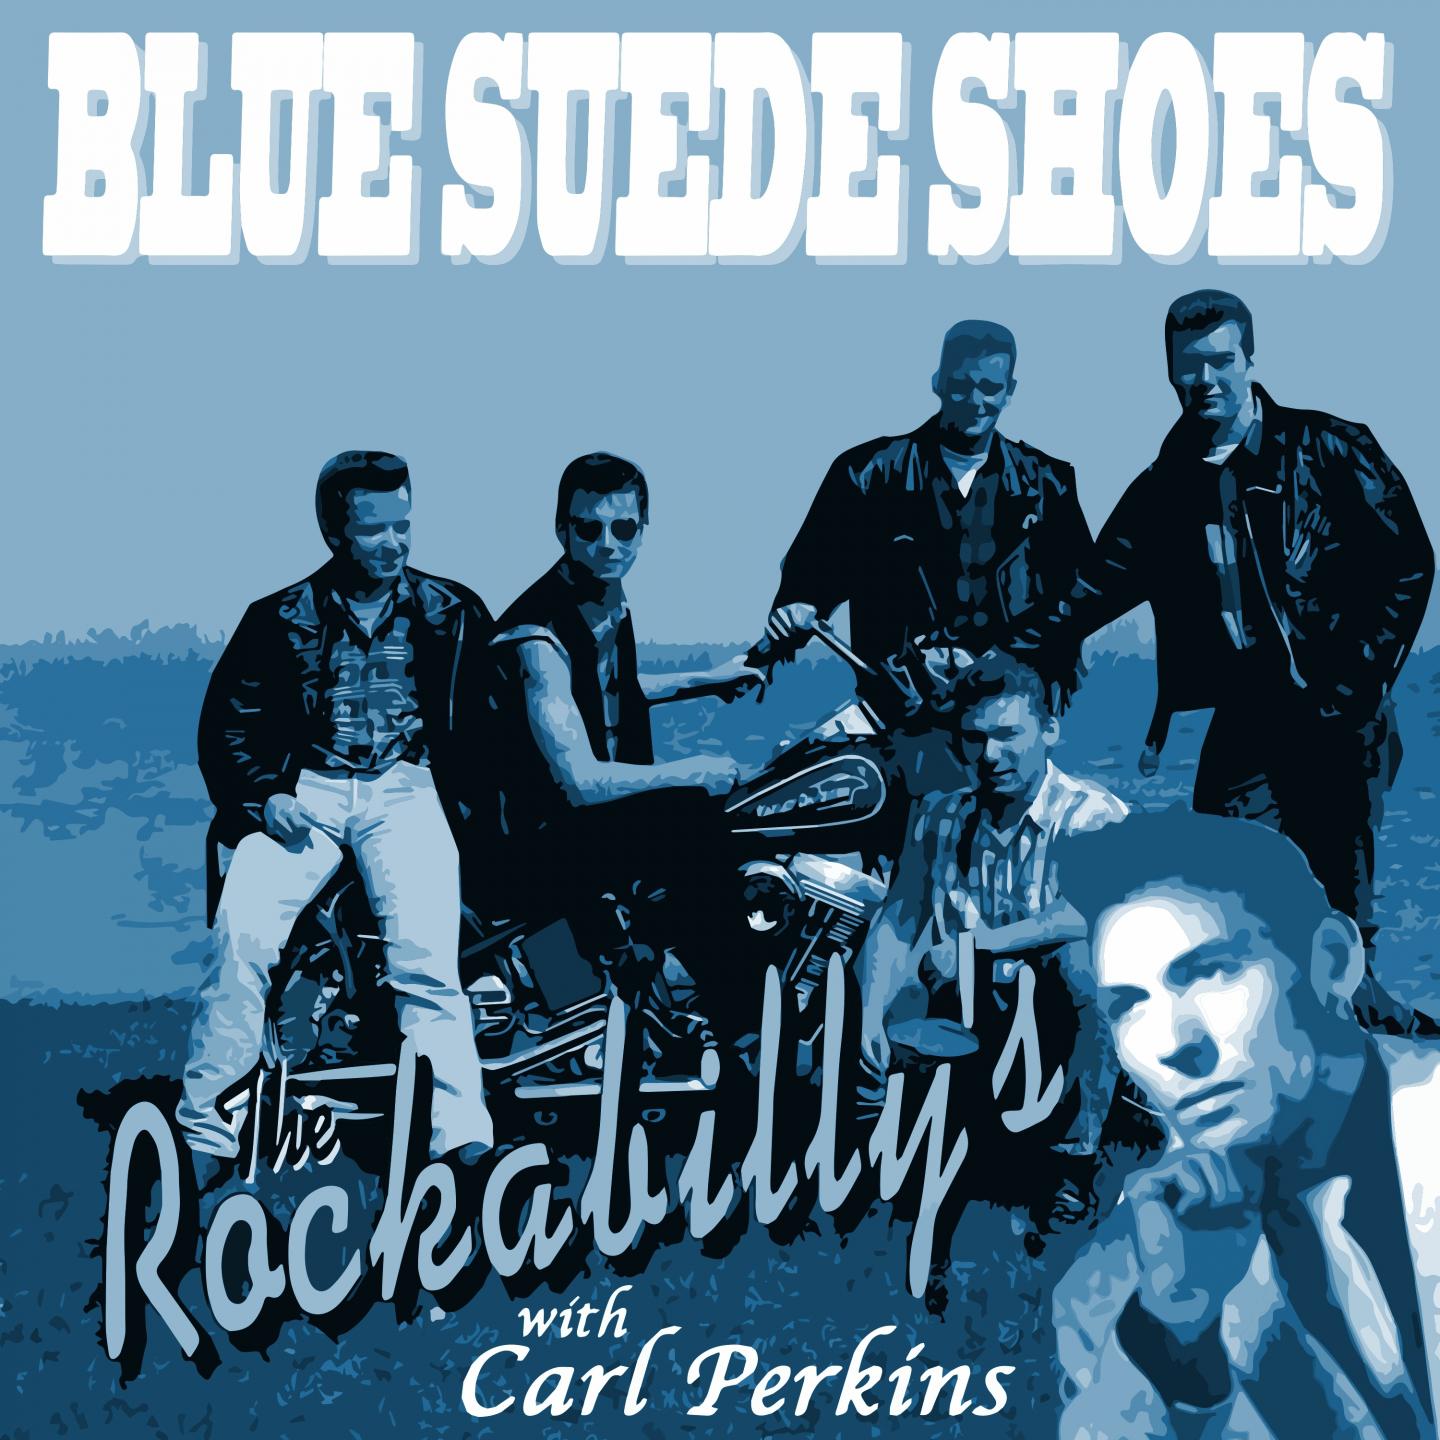 The Rockabilly's with Carl Perkins